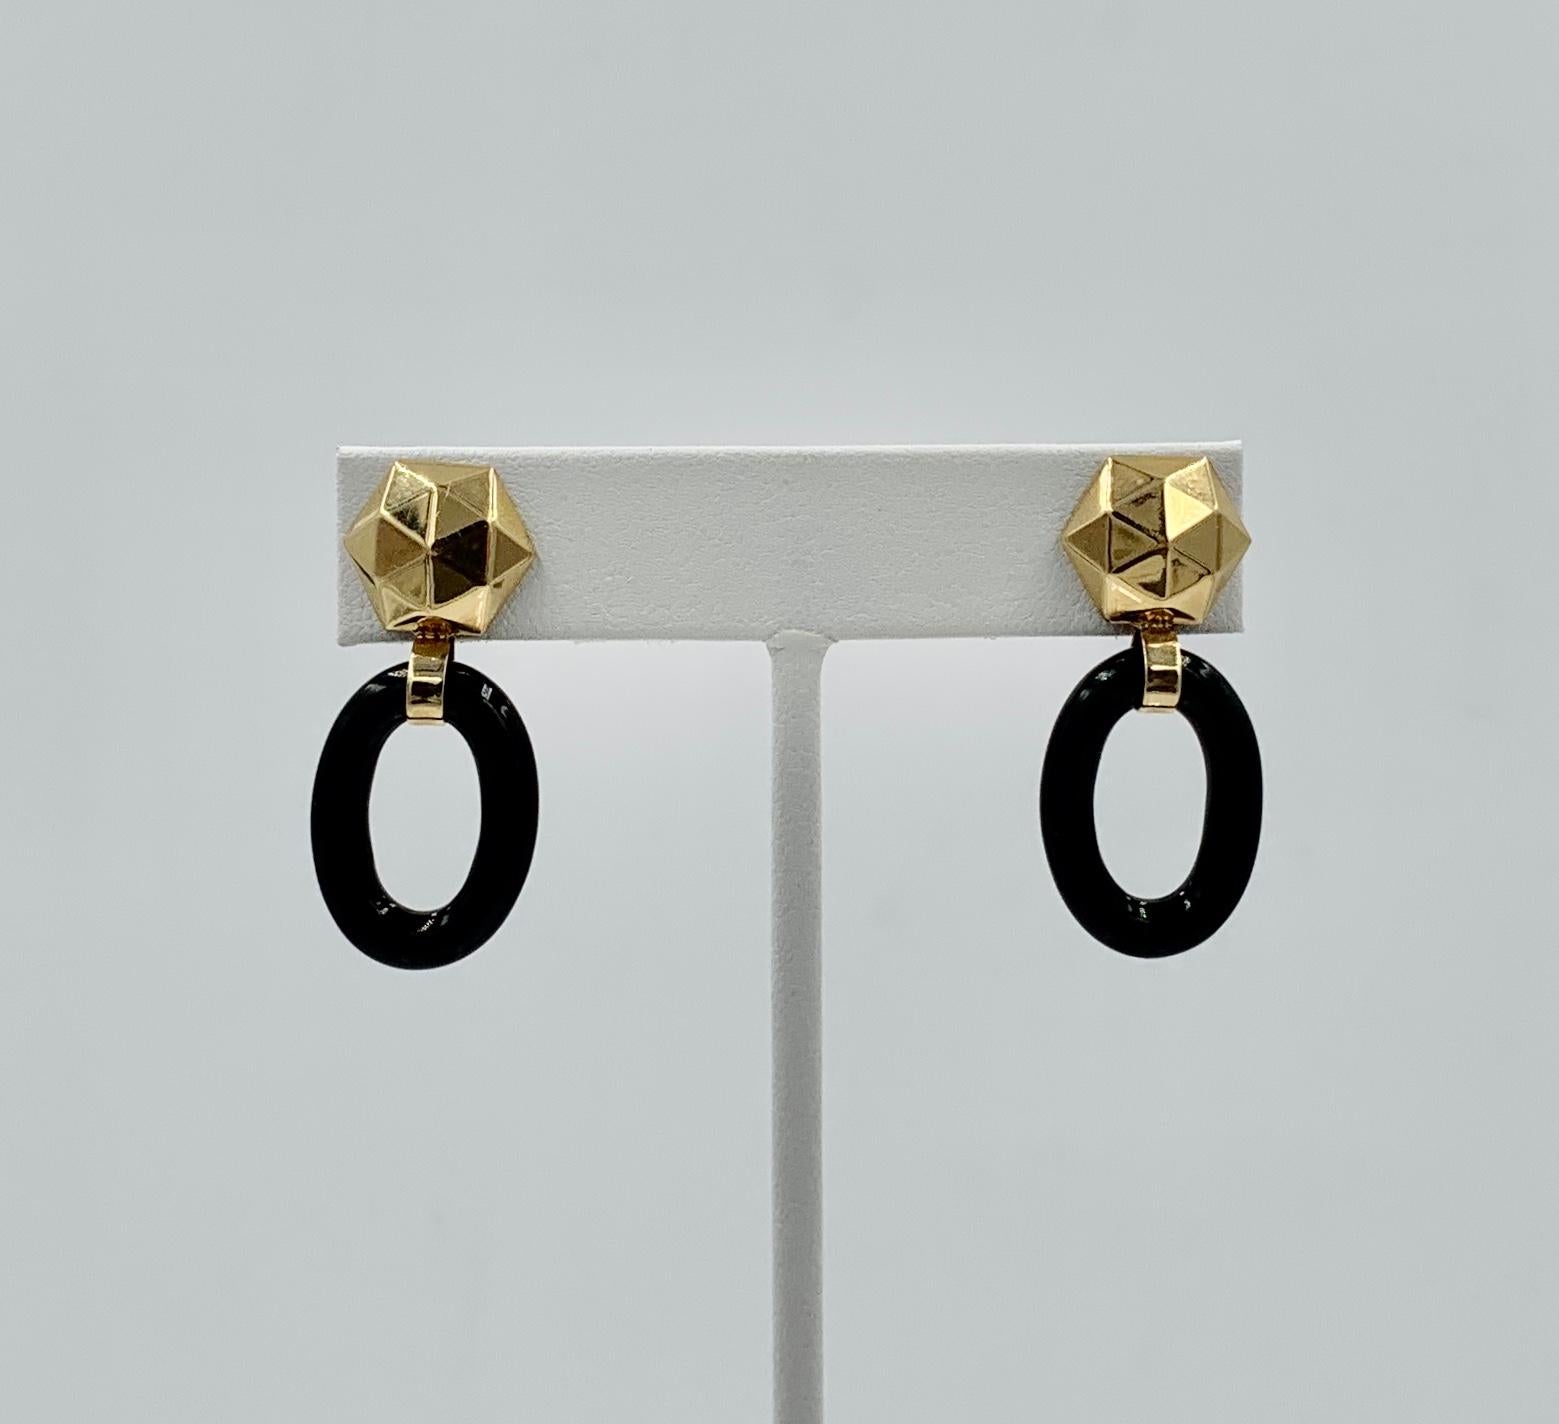 A classic pair of Retro Door Knocker Earrings with oval Black Onyx drops and wonderful pyramidal motif hexagonal tops in 14 Karat Yellow Gold.  These dangle drop earrings have the most wonderful combination of the Black Onyx and the warm 14 Karat